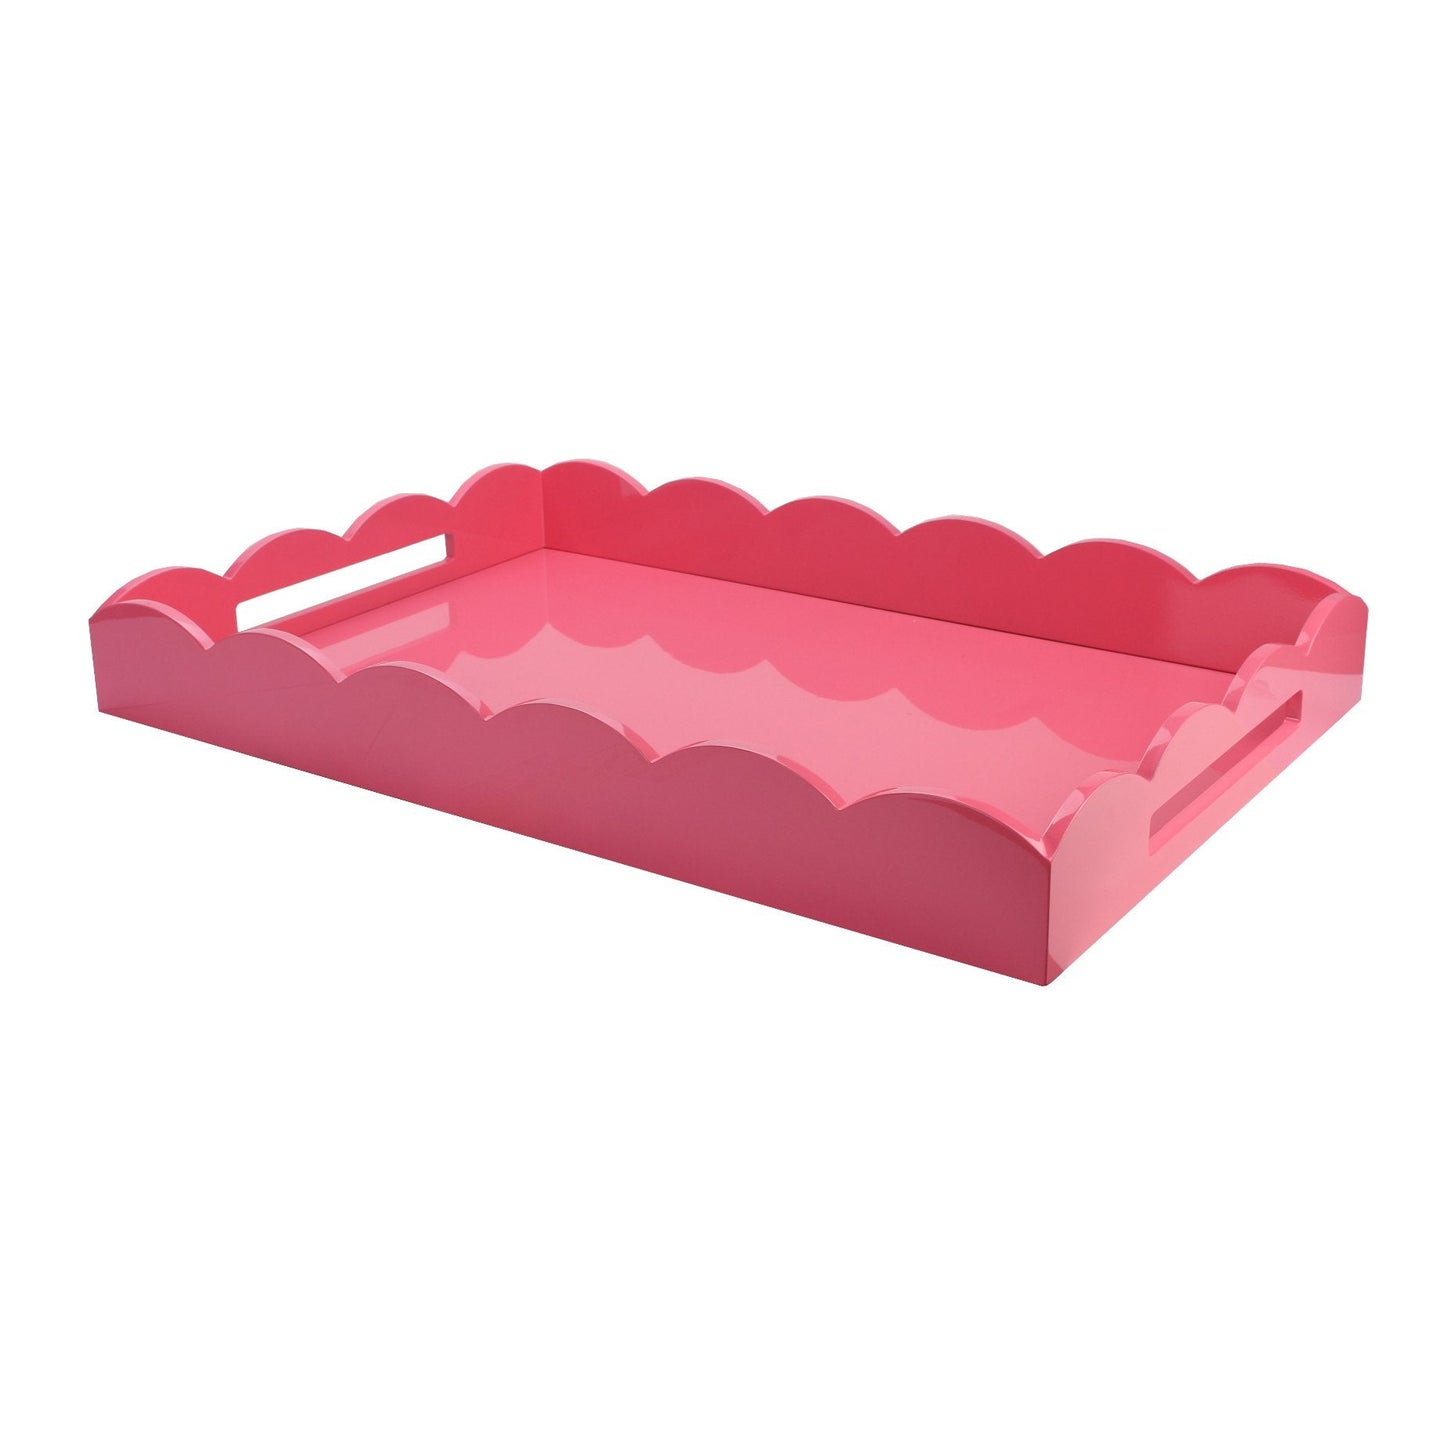 Large Lacquered Scallop Ottoman tray - Pink